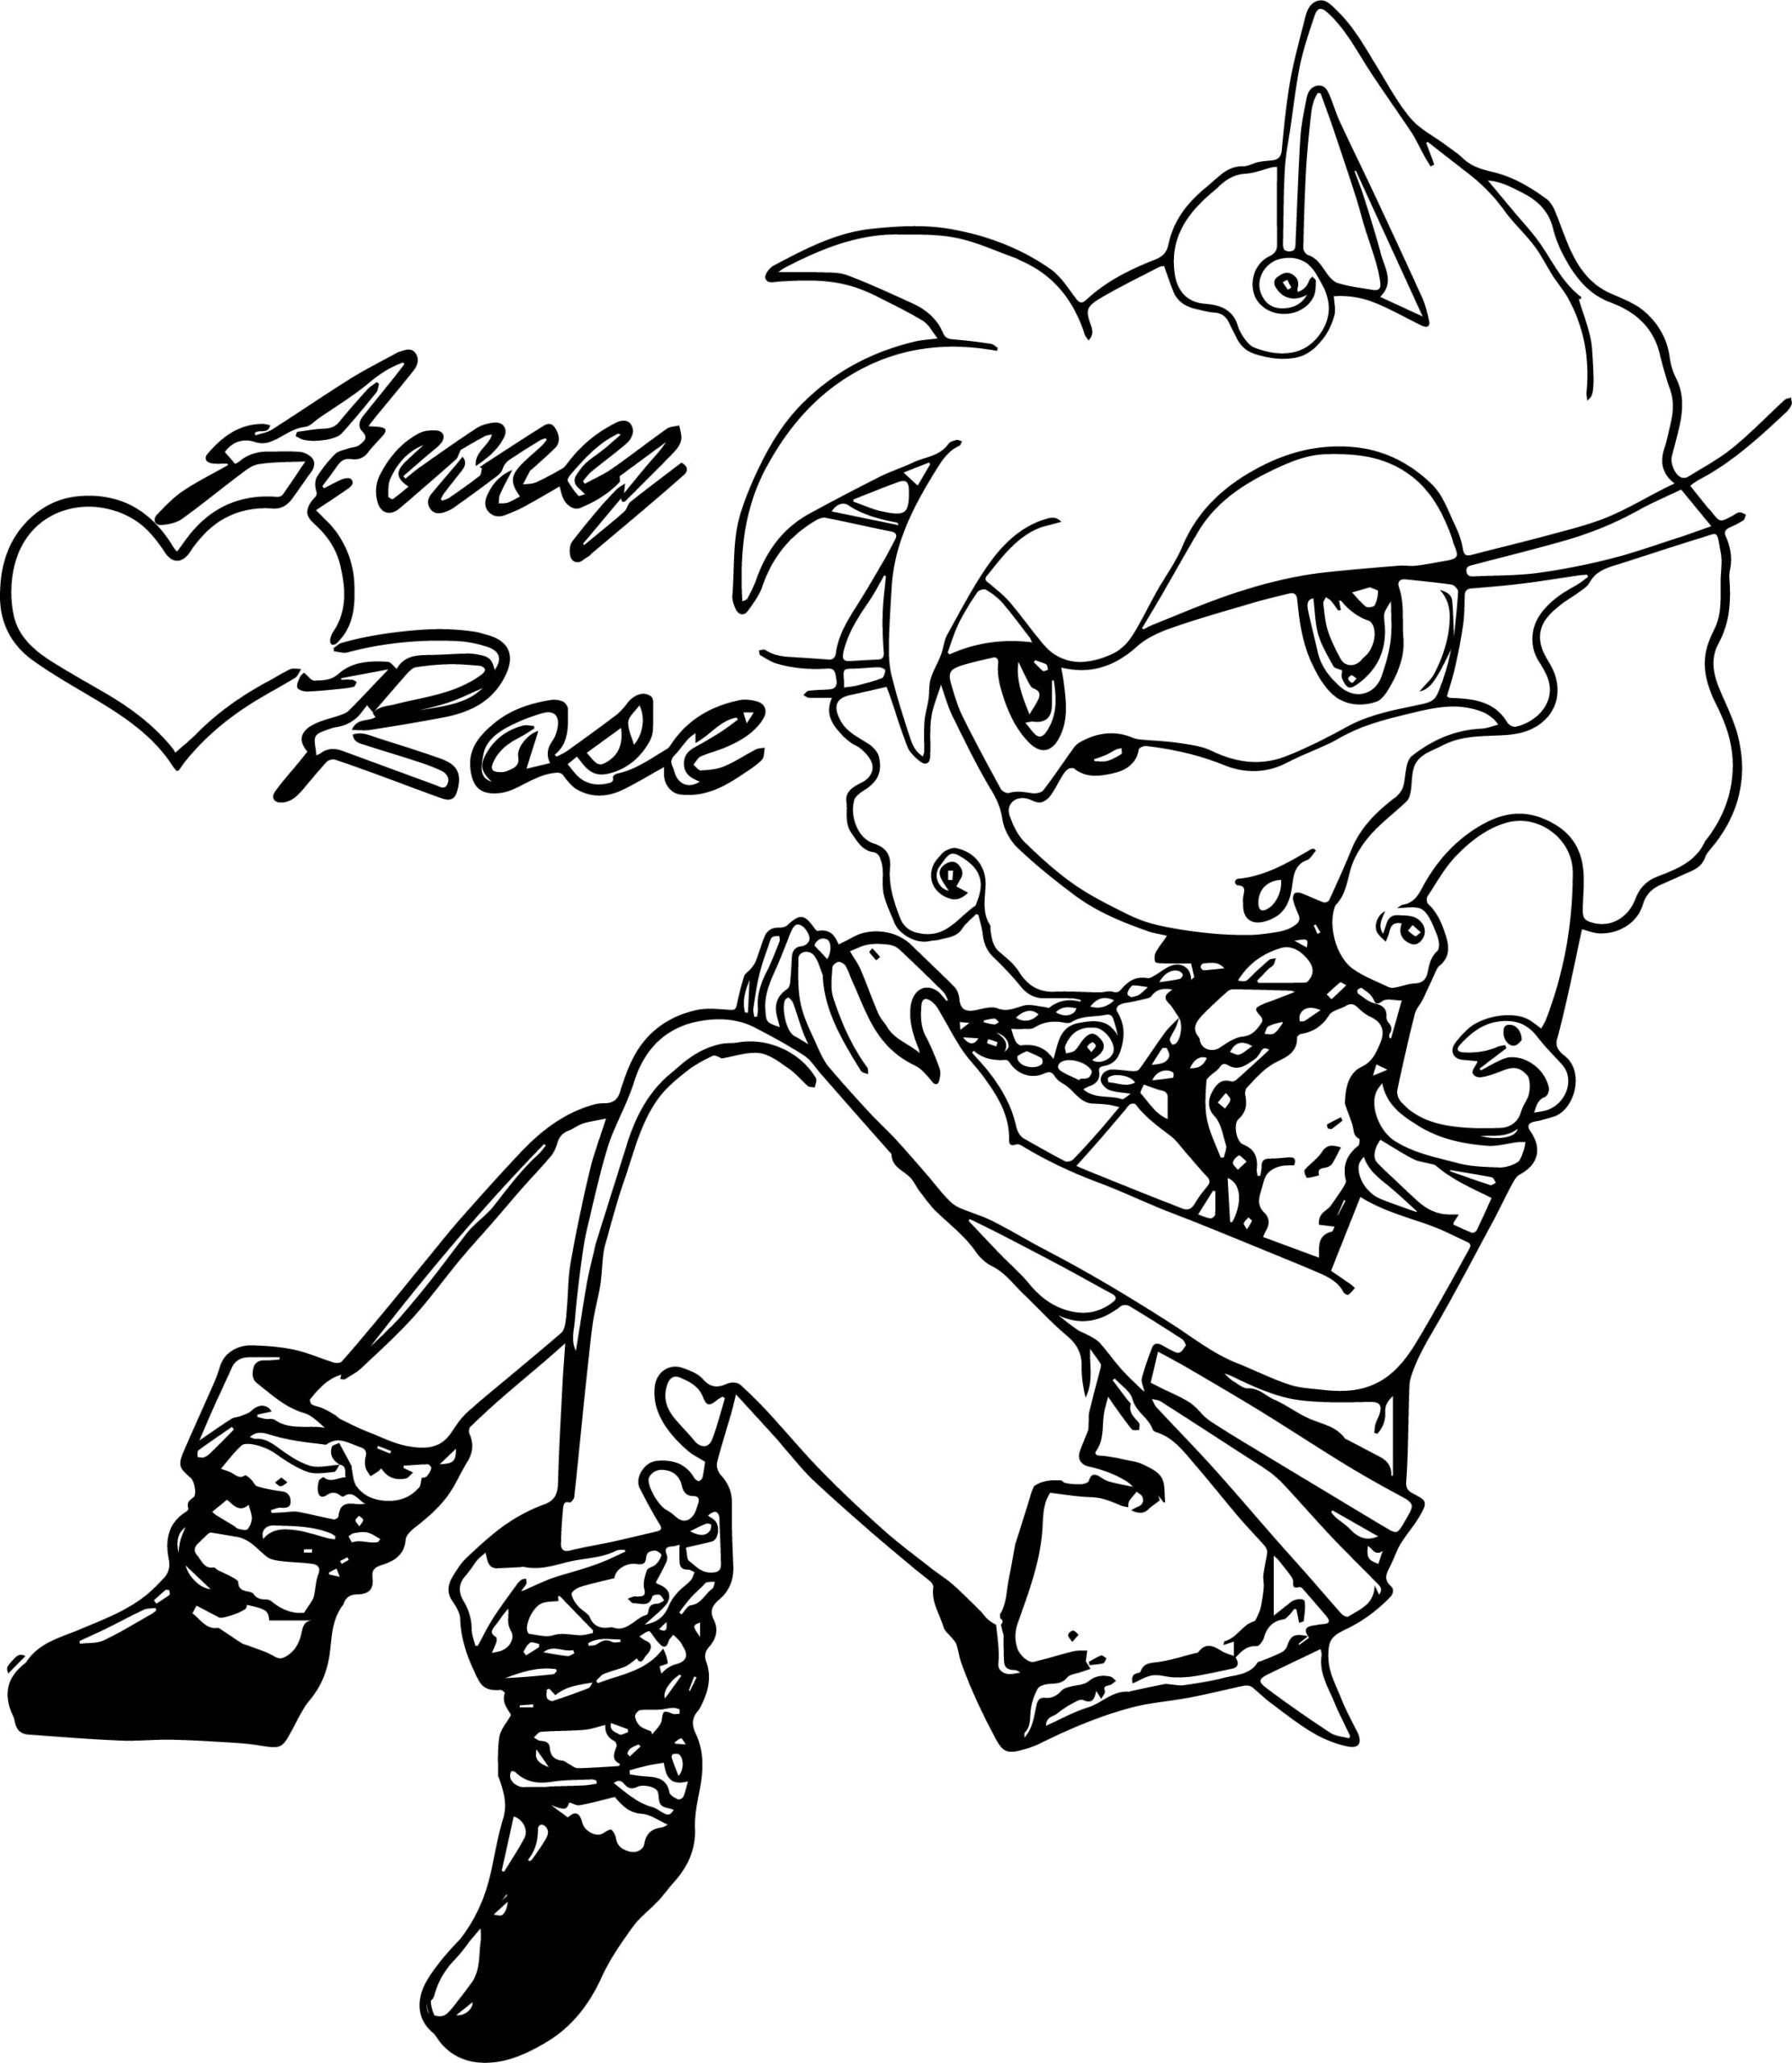 Amy Rose Hour Coloring Page | Wecoloringpage à Coloriage Amy Rose